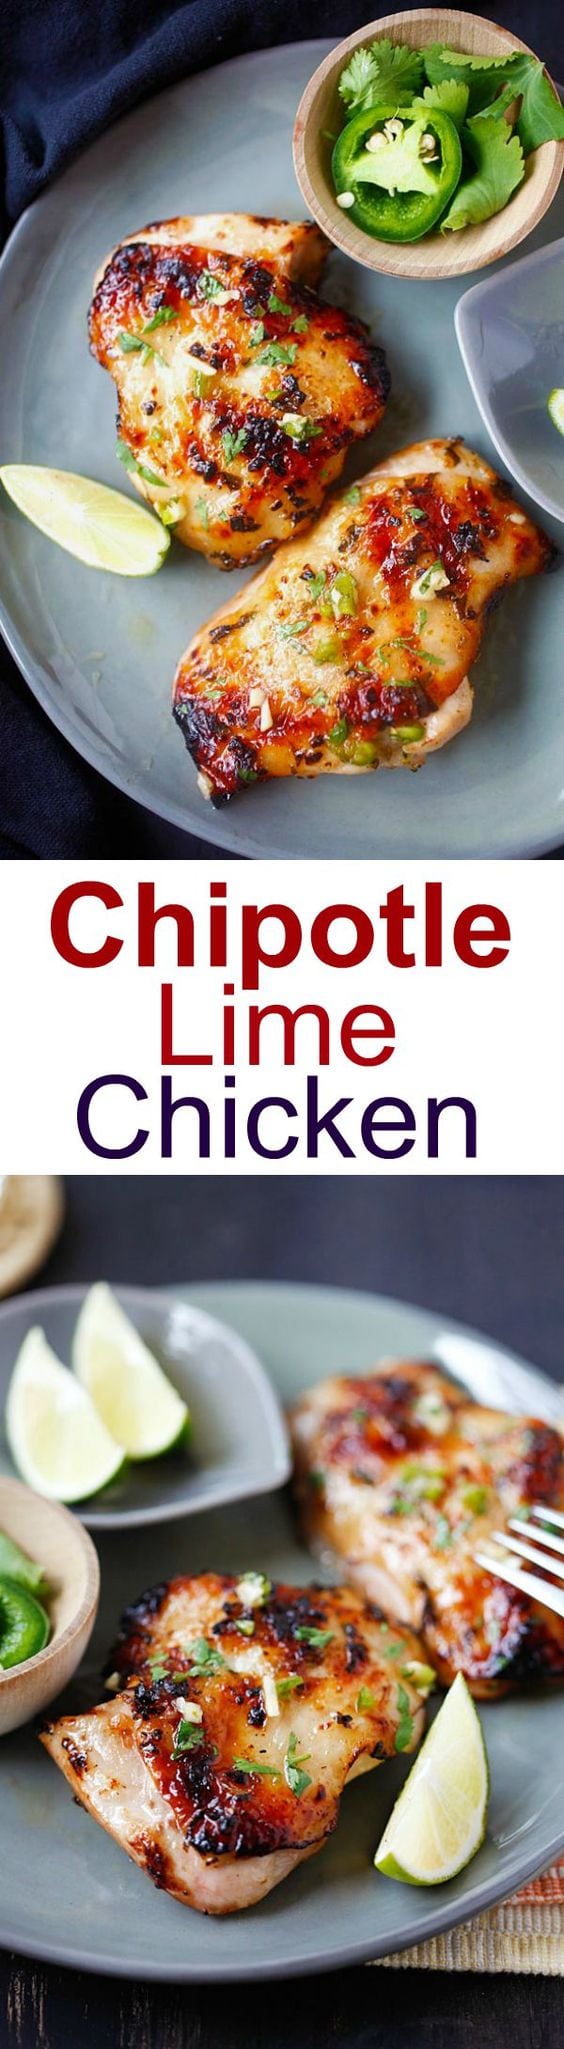 Chipotle Lime Chicken - ridiculously delicious and juicy grilled chicken recipe with chipotle chili, lime juice, garlic and cilantro! | rasamalaysia.com